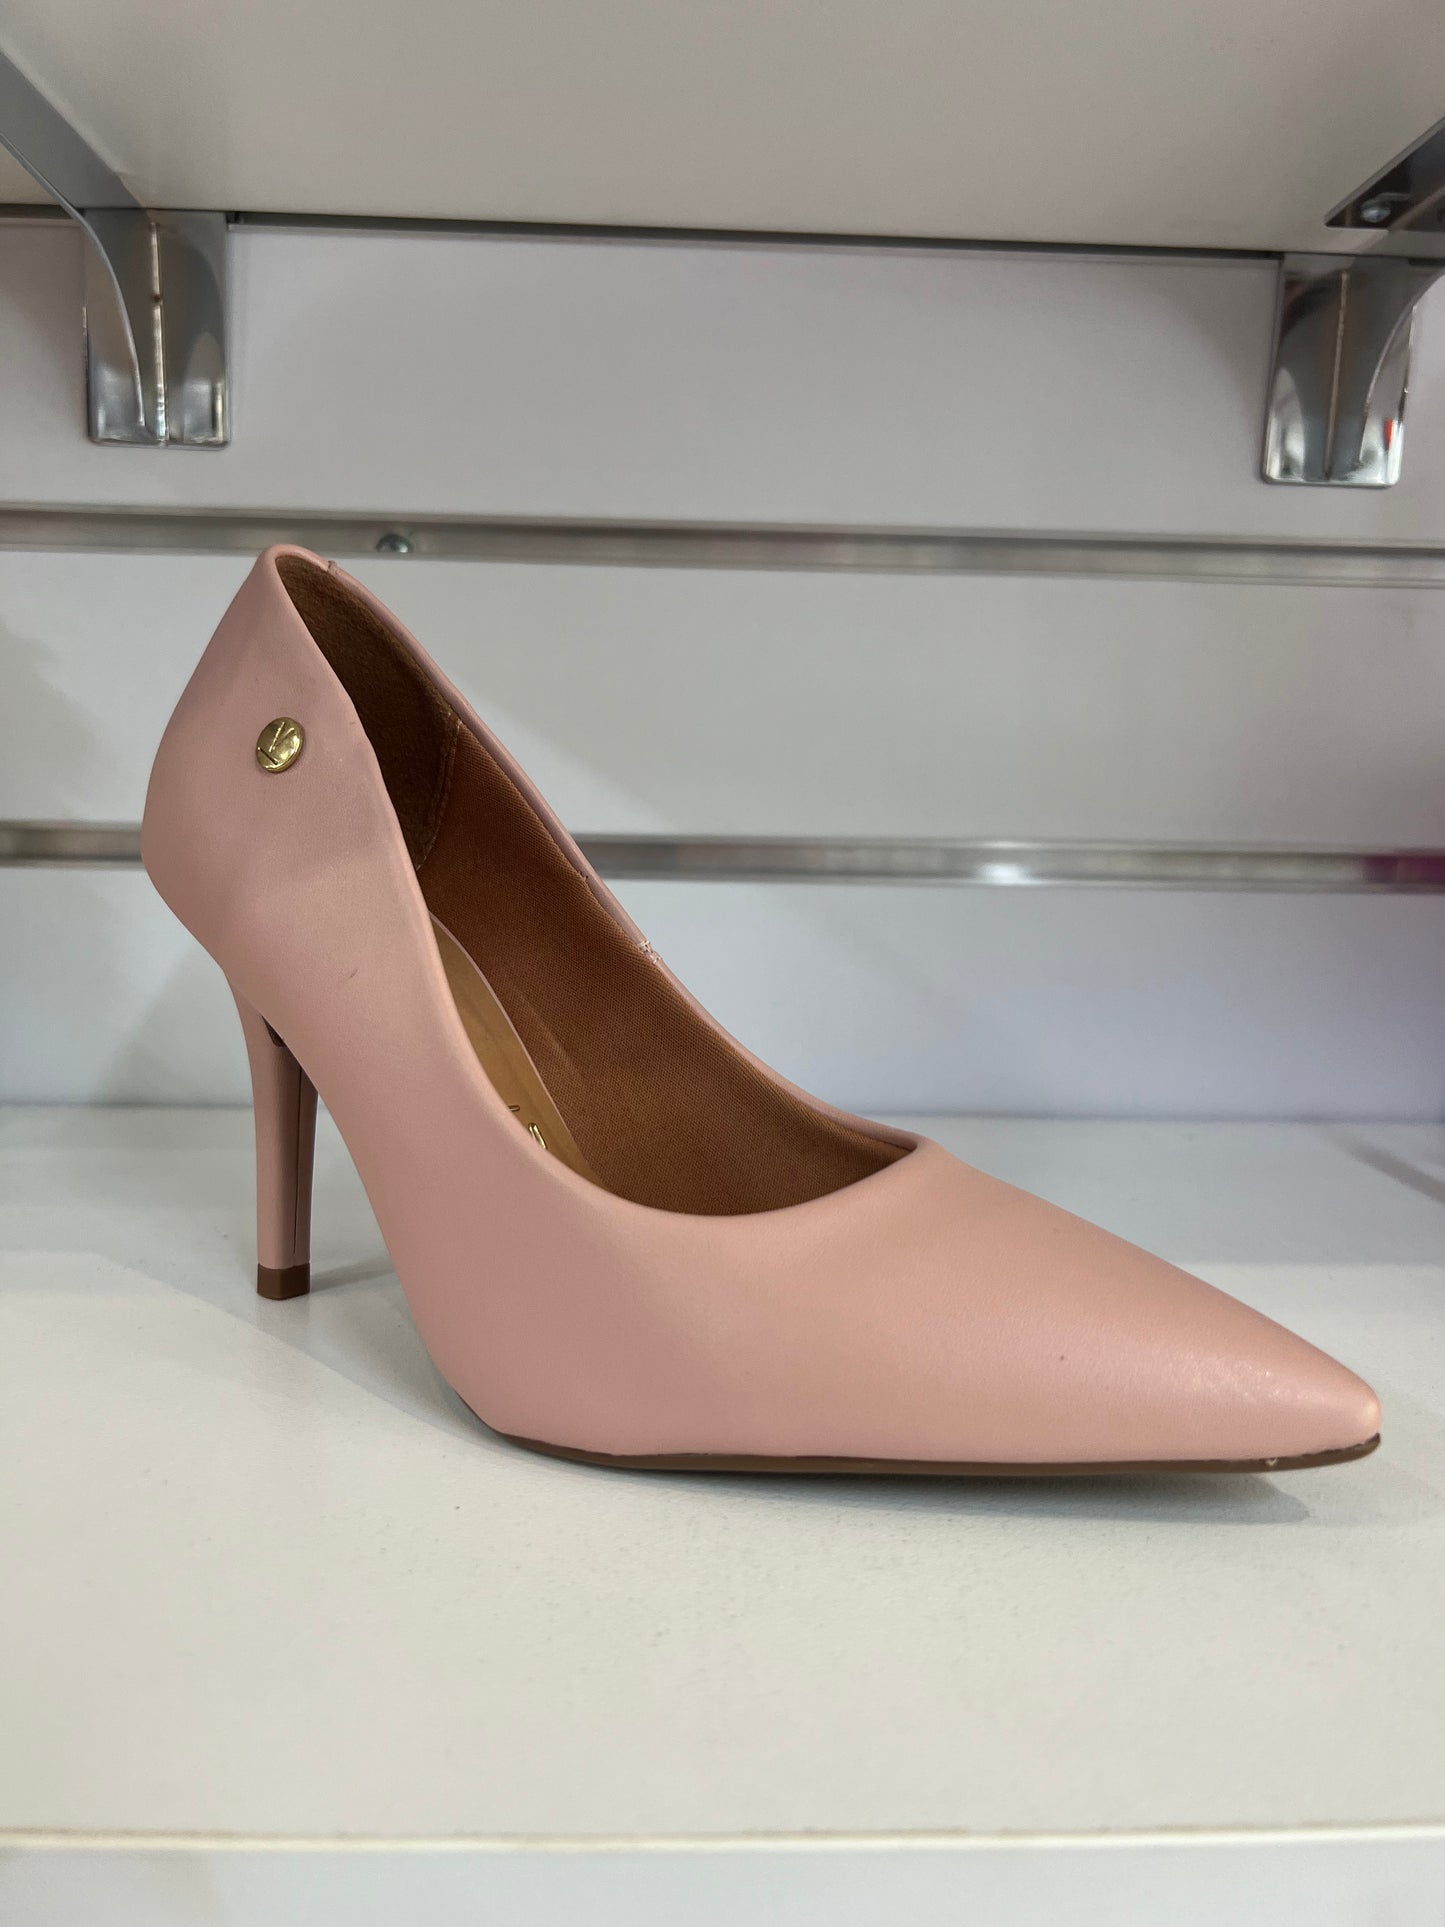 GINGER Vizzano Pump - VIZZANO - 10, 11, 5, 6, 7, 8, 9, BF, BLACK, Cobalt Blue, Hot Pink, Nude, Nude/Pink, on sale, RED, womens footwear - Stomp Shoes Darwin